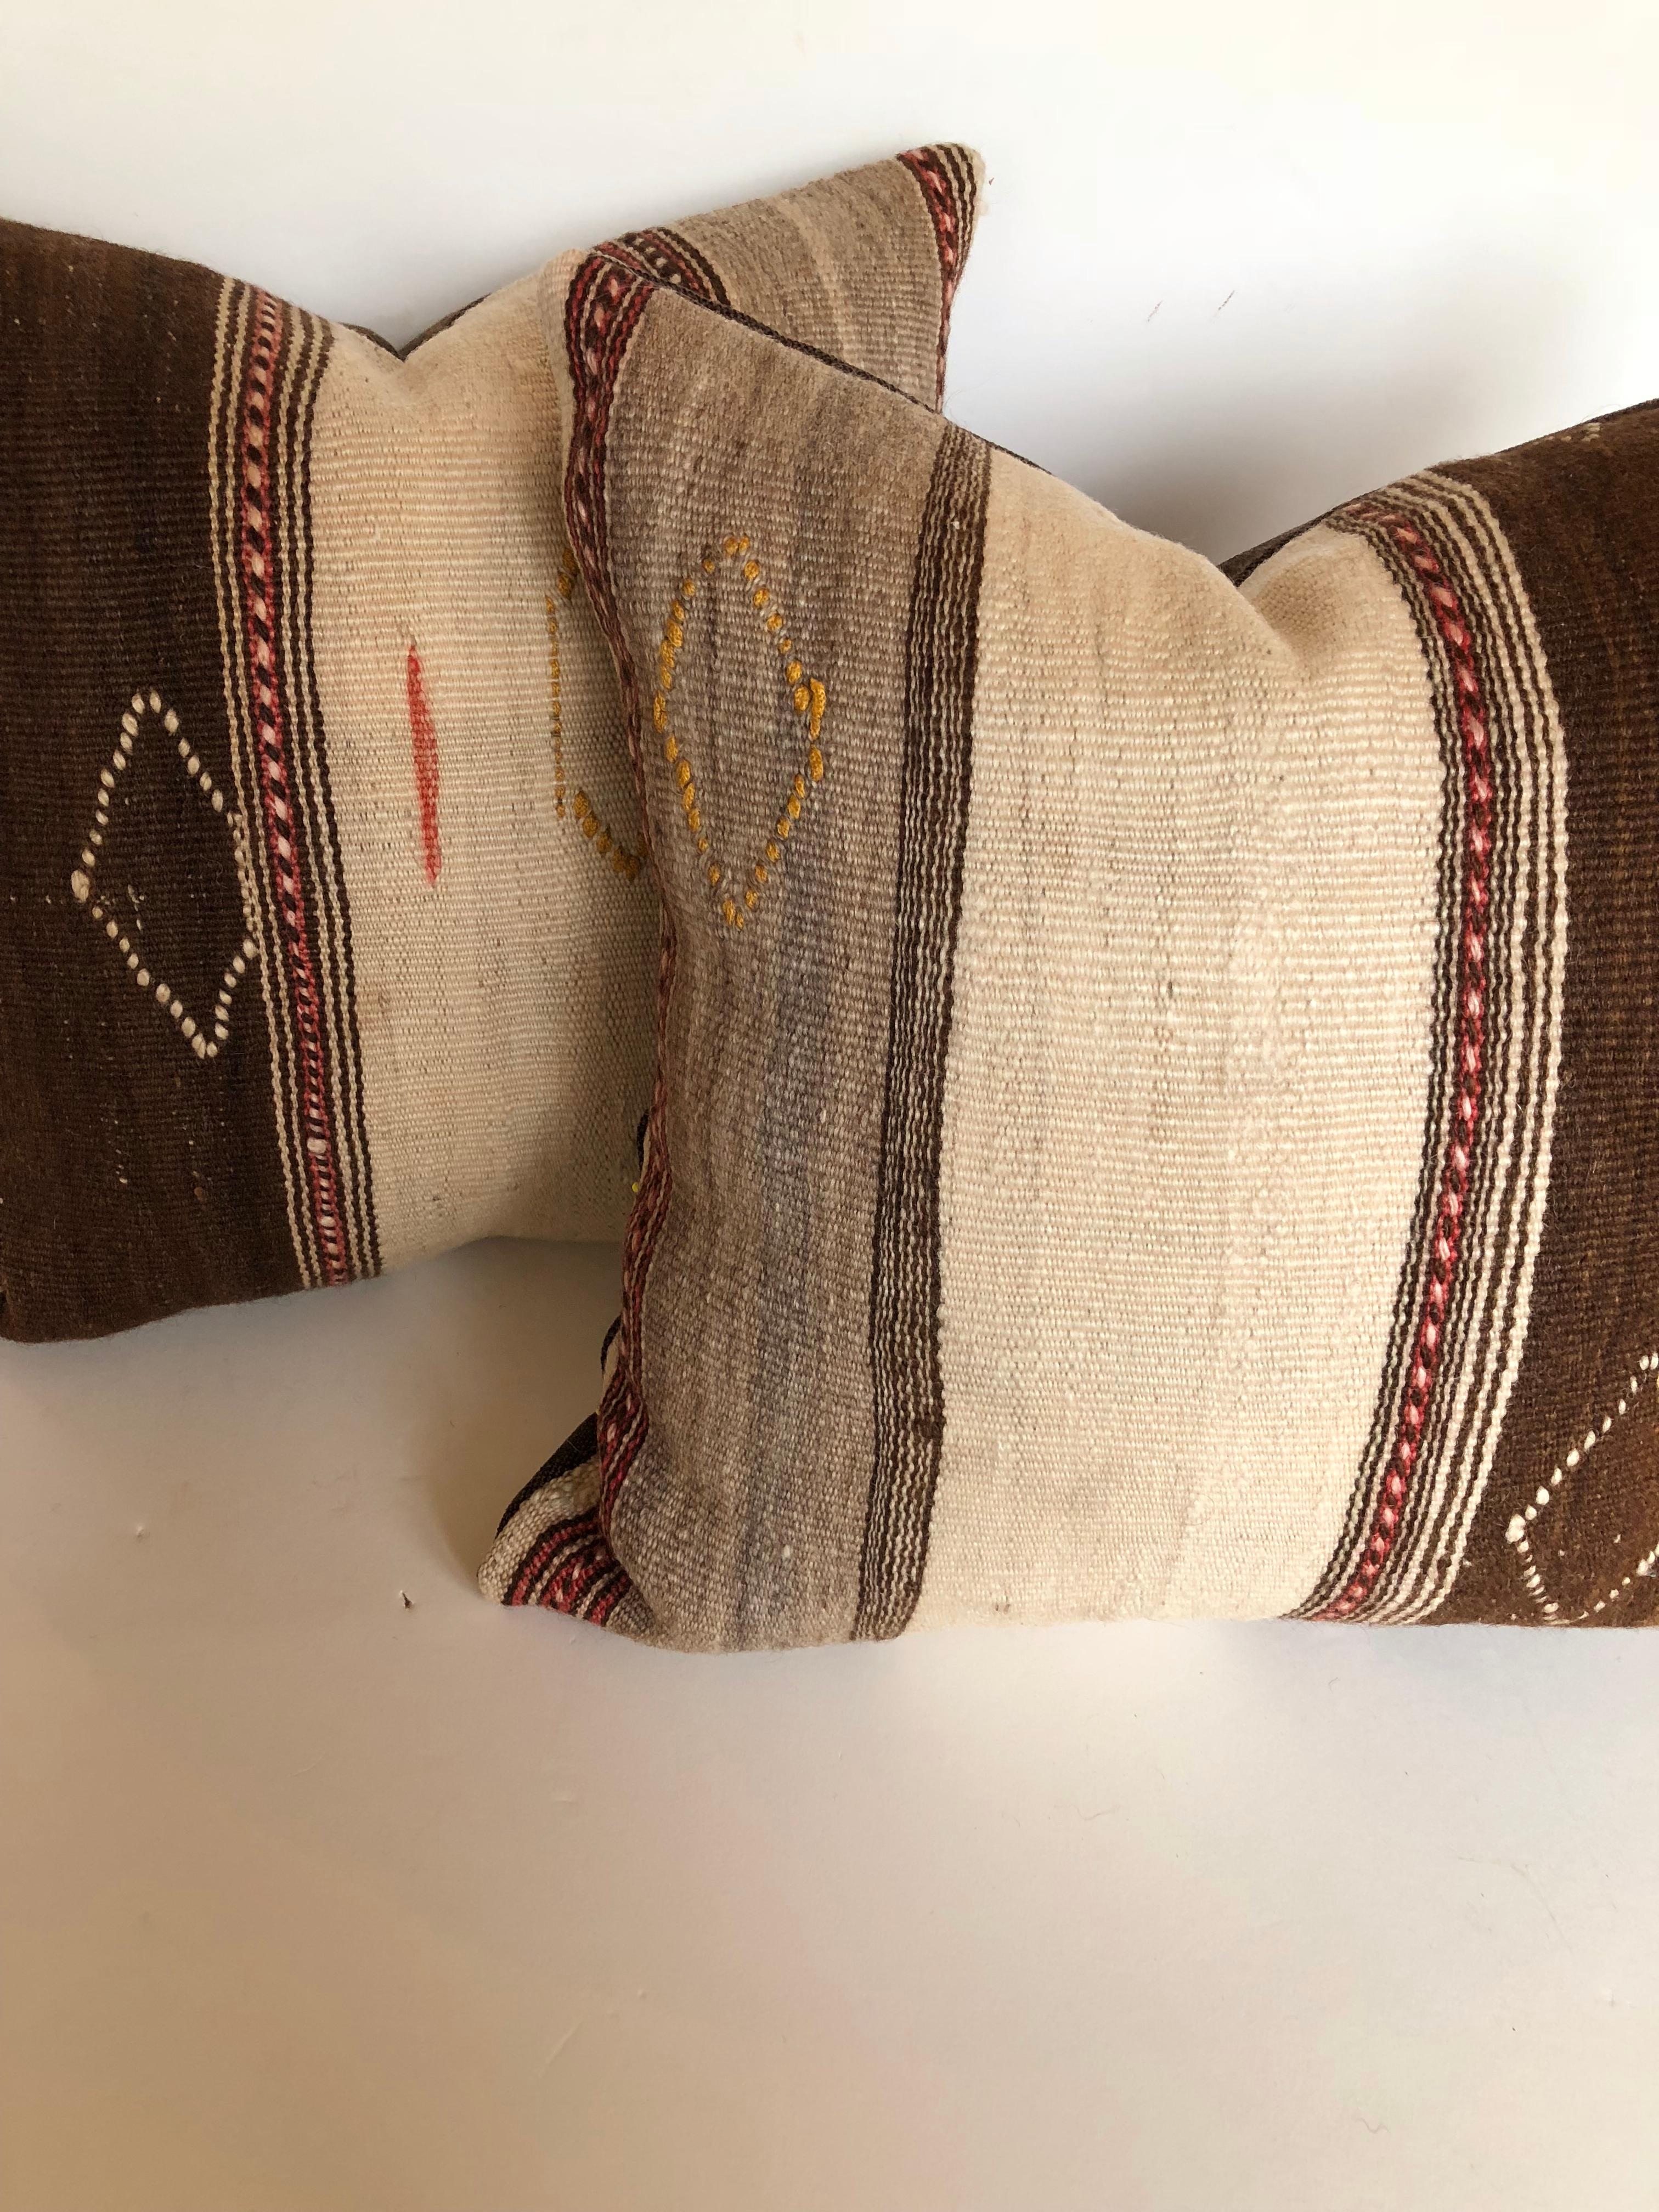 20th Century Custom Pillows Cut from a Vintage Moroccan Wool Ourika Rug, Atlas Mountains